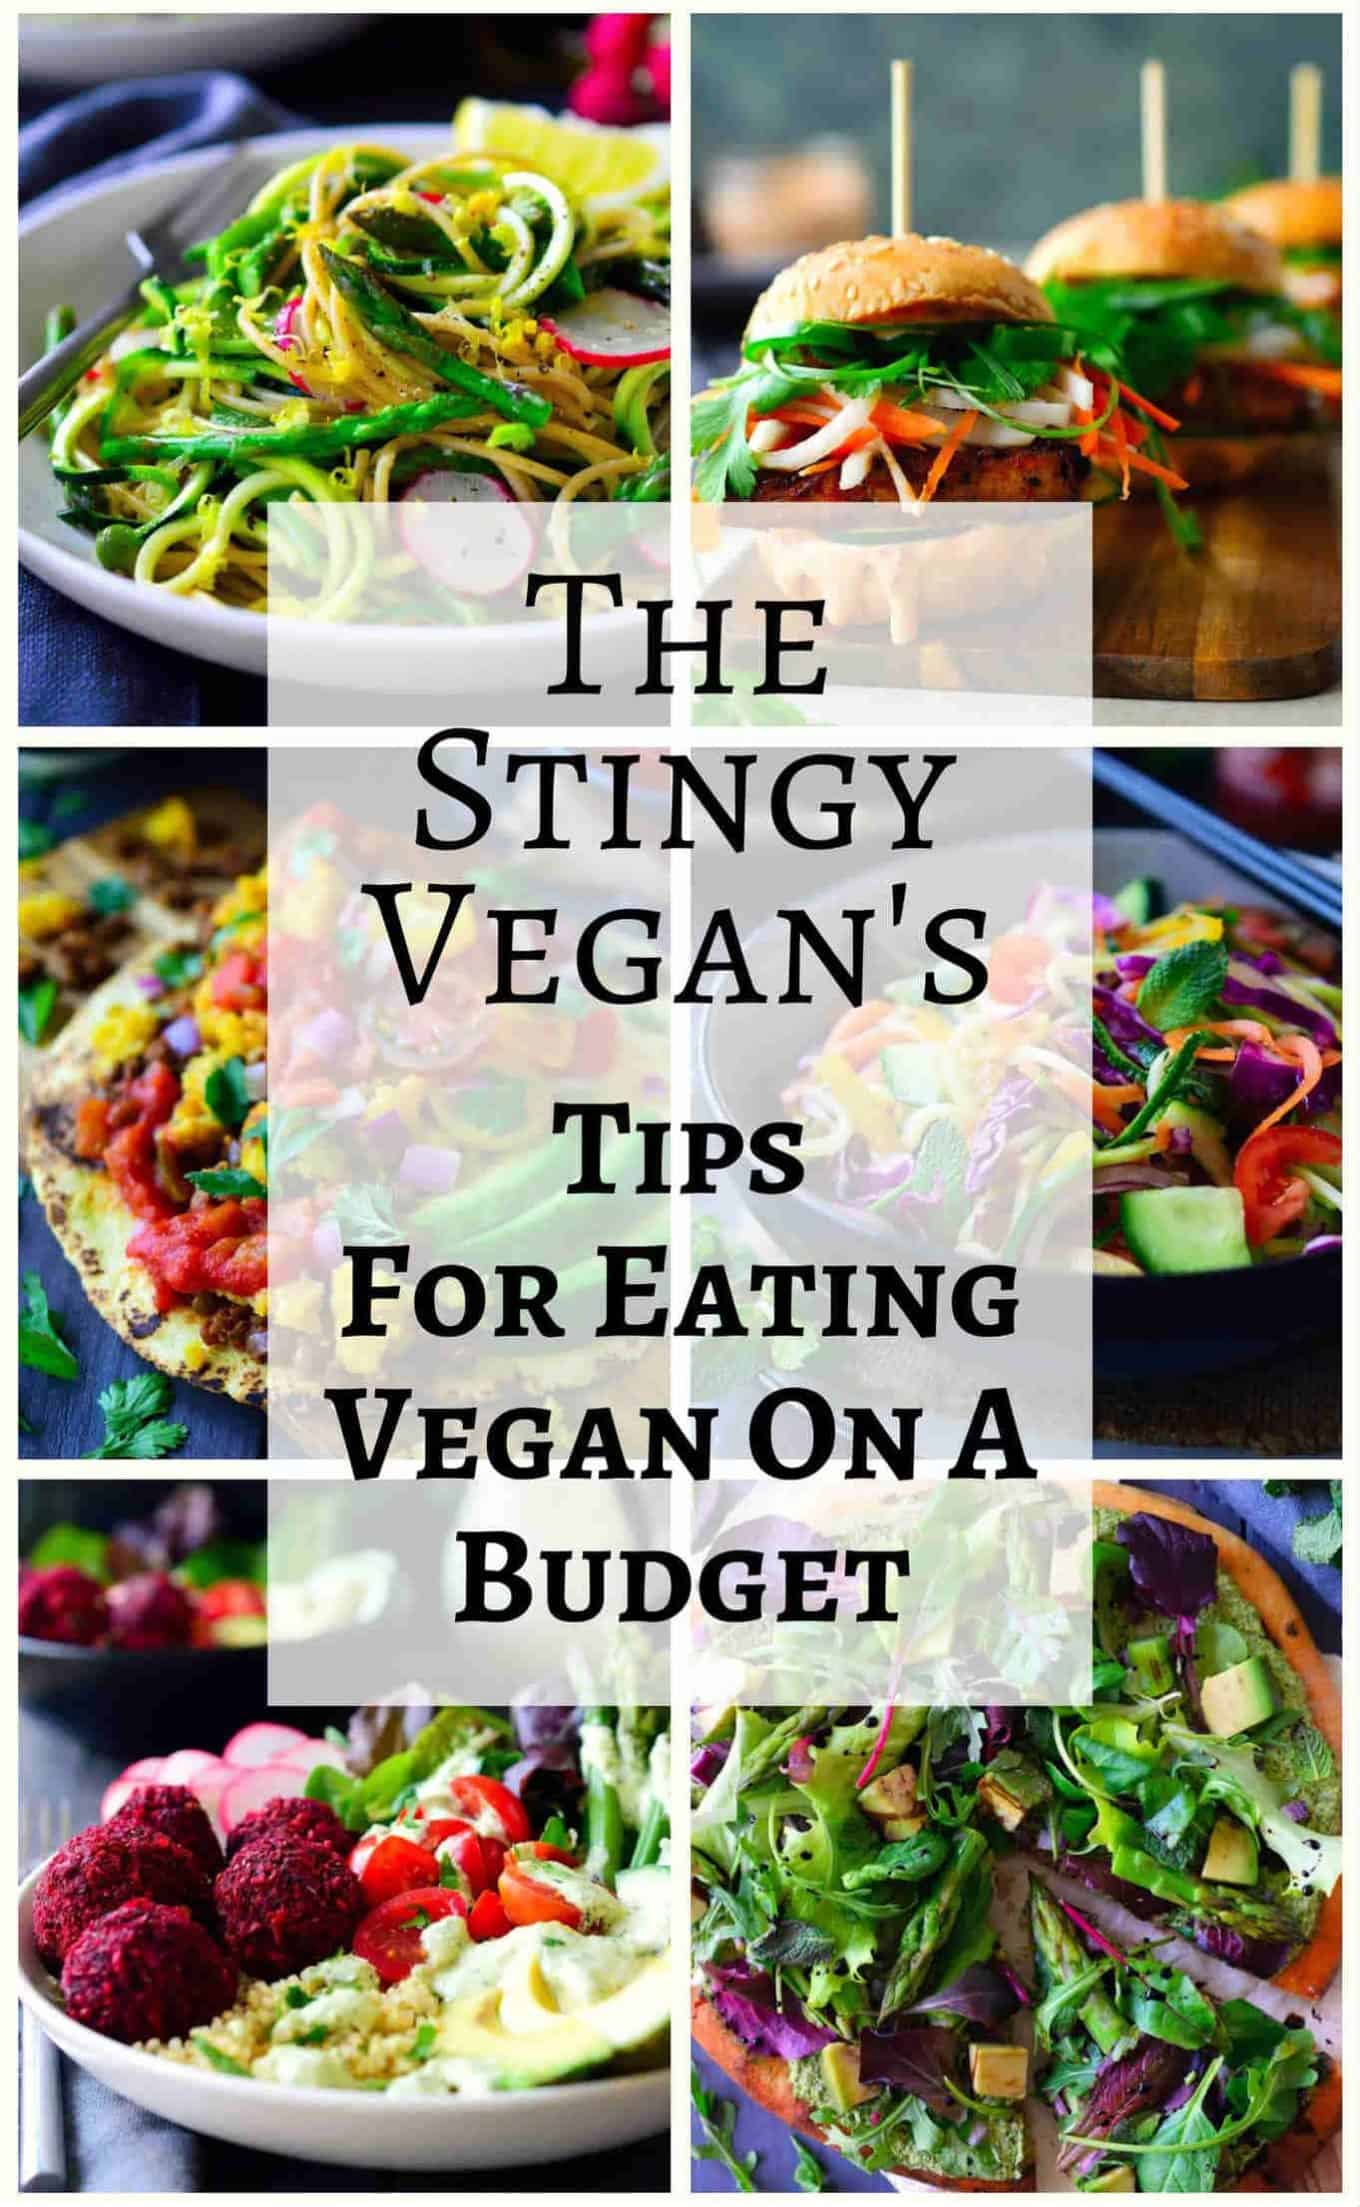 The key to eating vegan on a budget is simple: eat whole foods that are in season, cook at home when you can and take the time for a little bit of planning. Below I've compiled a list of some of my personal experiences of eating vegan on a budget and my favourite money-saving tips and tricks.